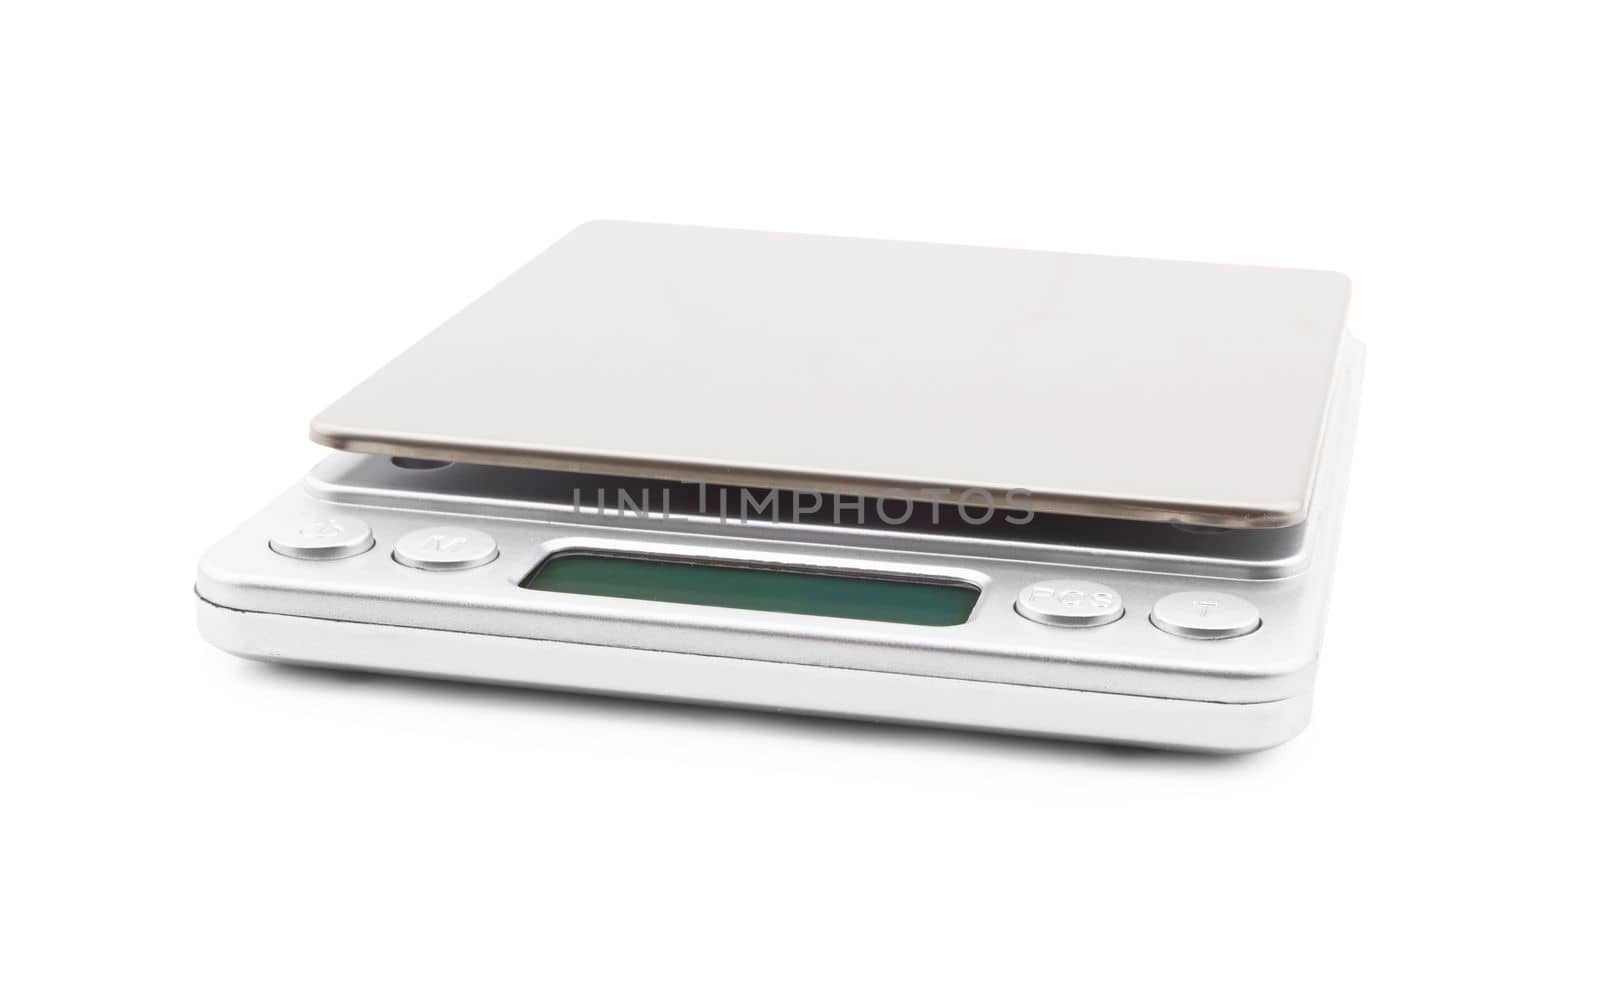 Portable electronic scale by pioneer111